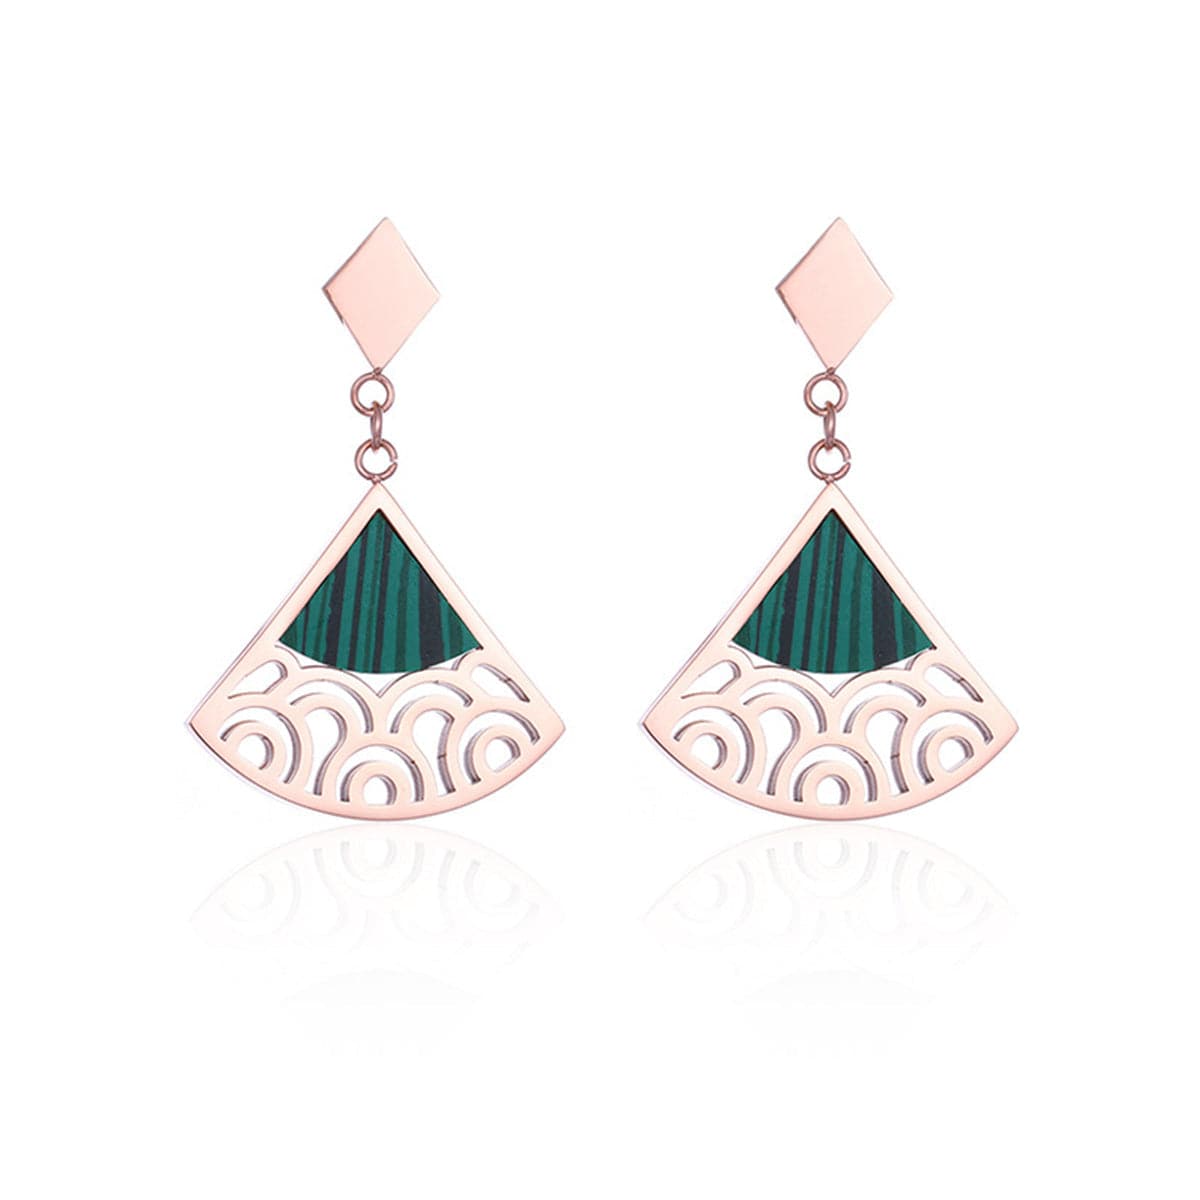 Green & 18K Rose Gold-Plated Filigree Triangle Drop Earrings